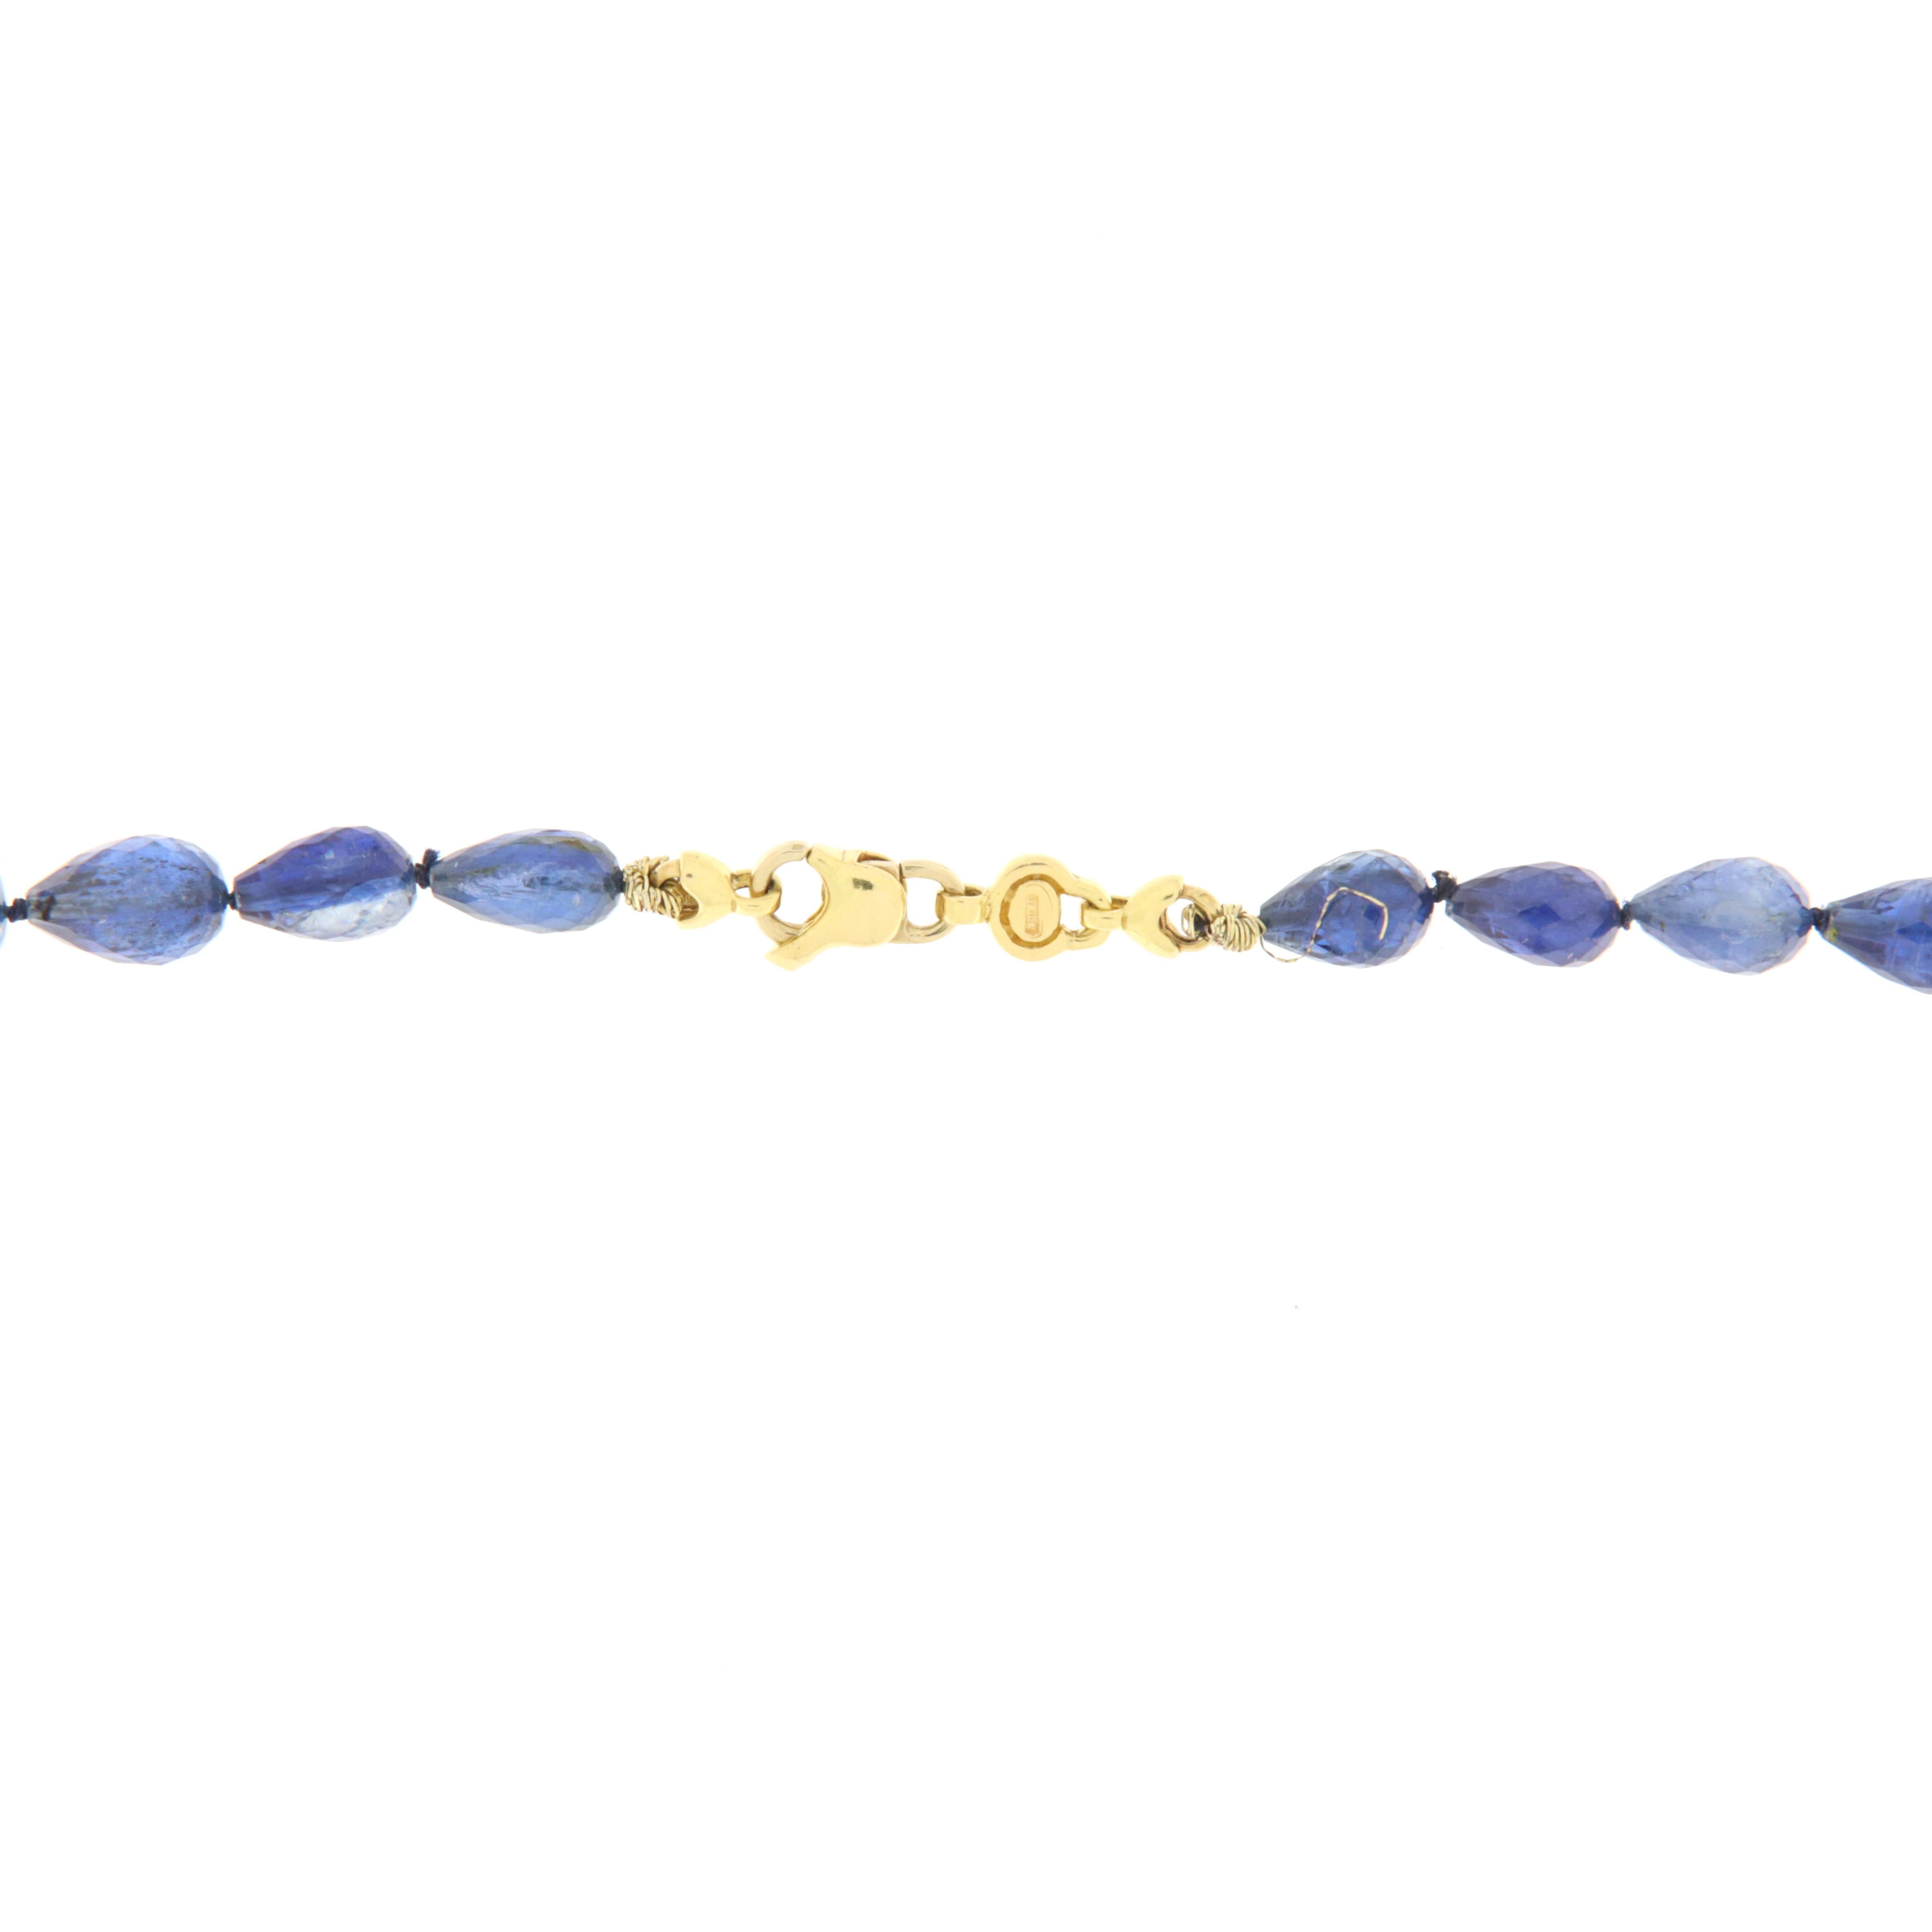 Modern Yellow Gold Long Necklace 18k with Australian Pearls and Kyanite